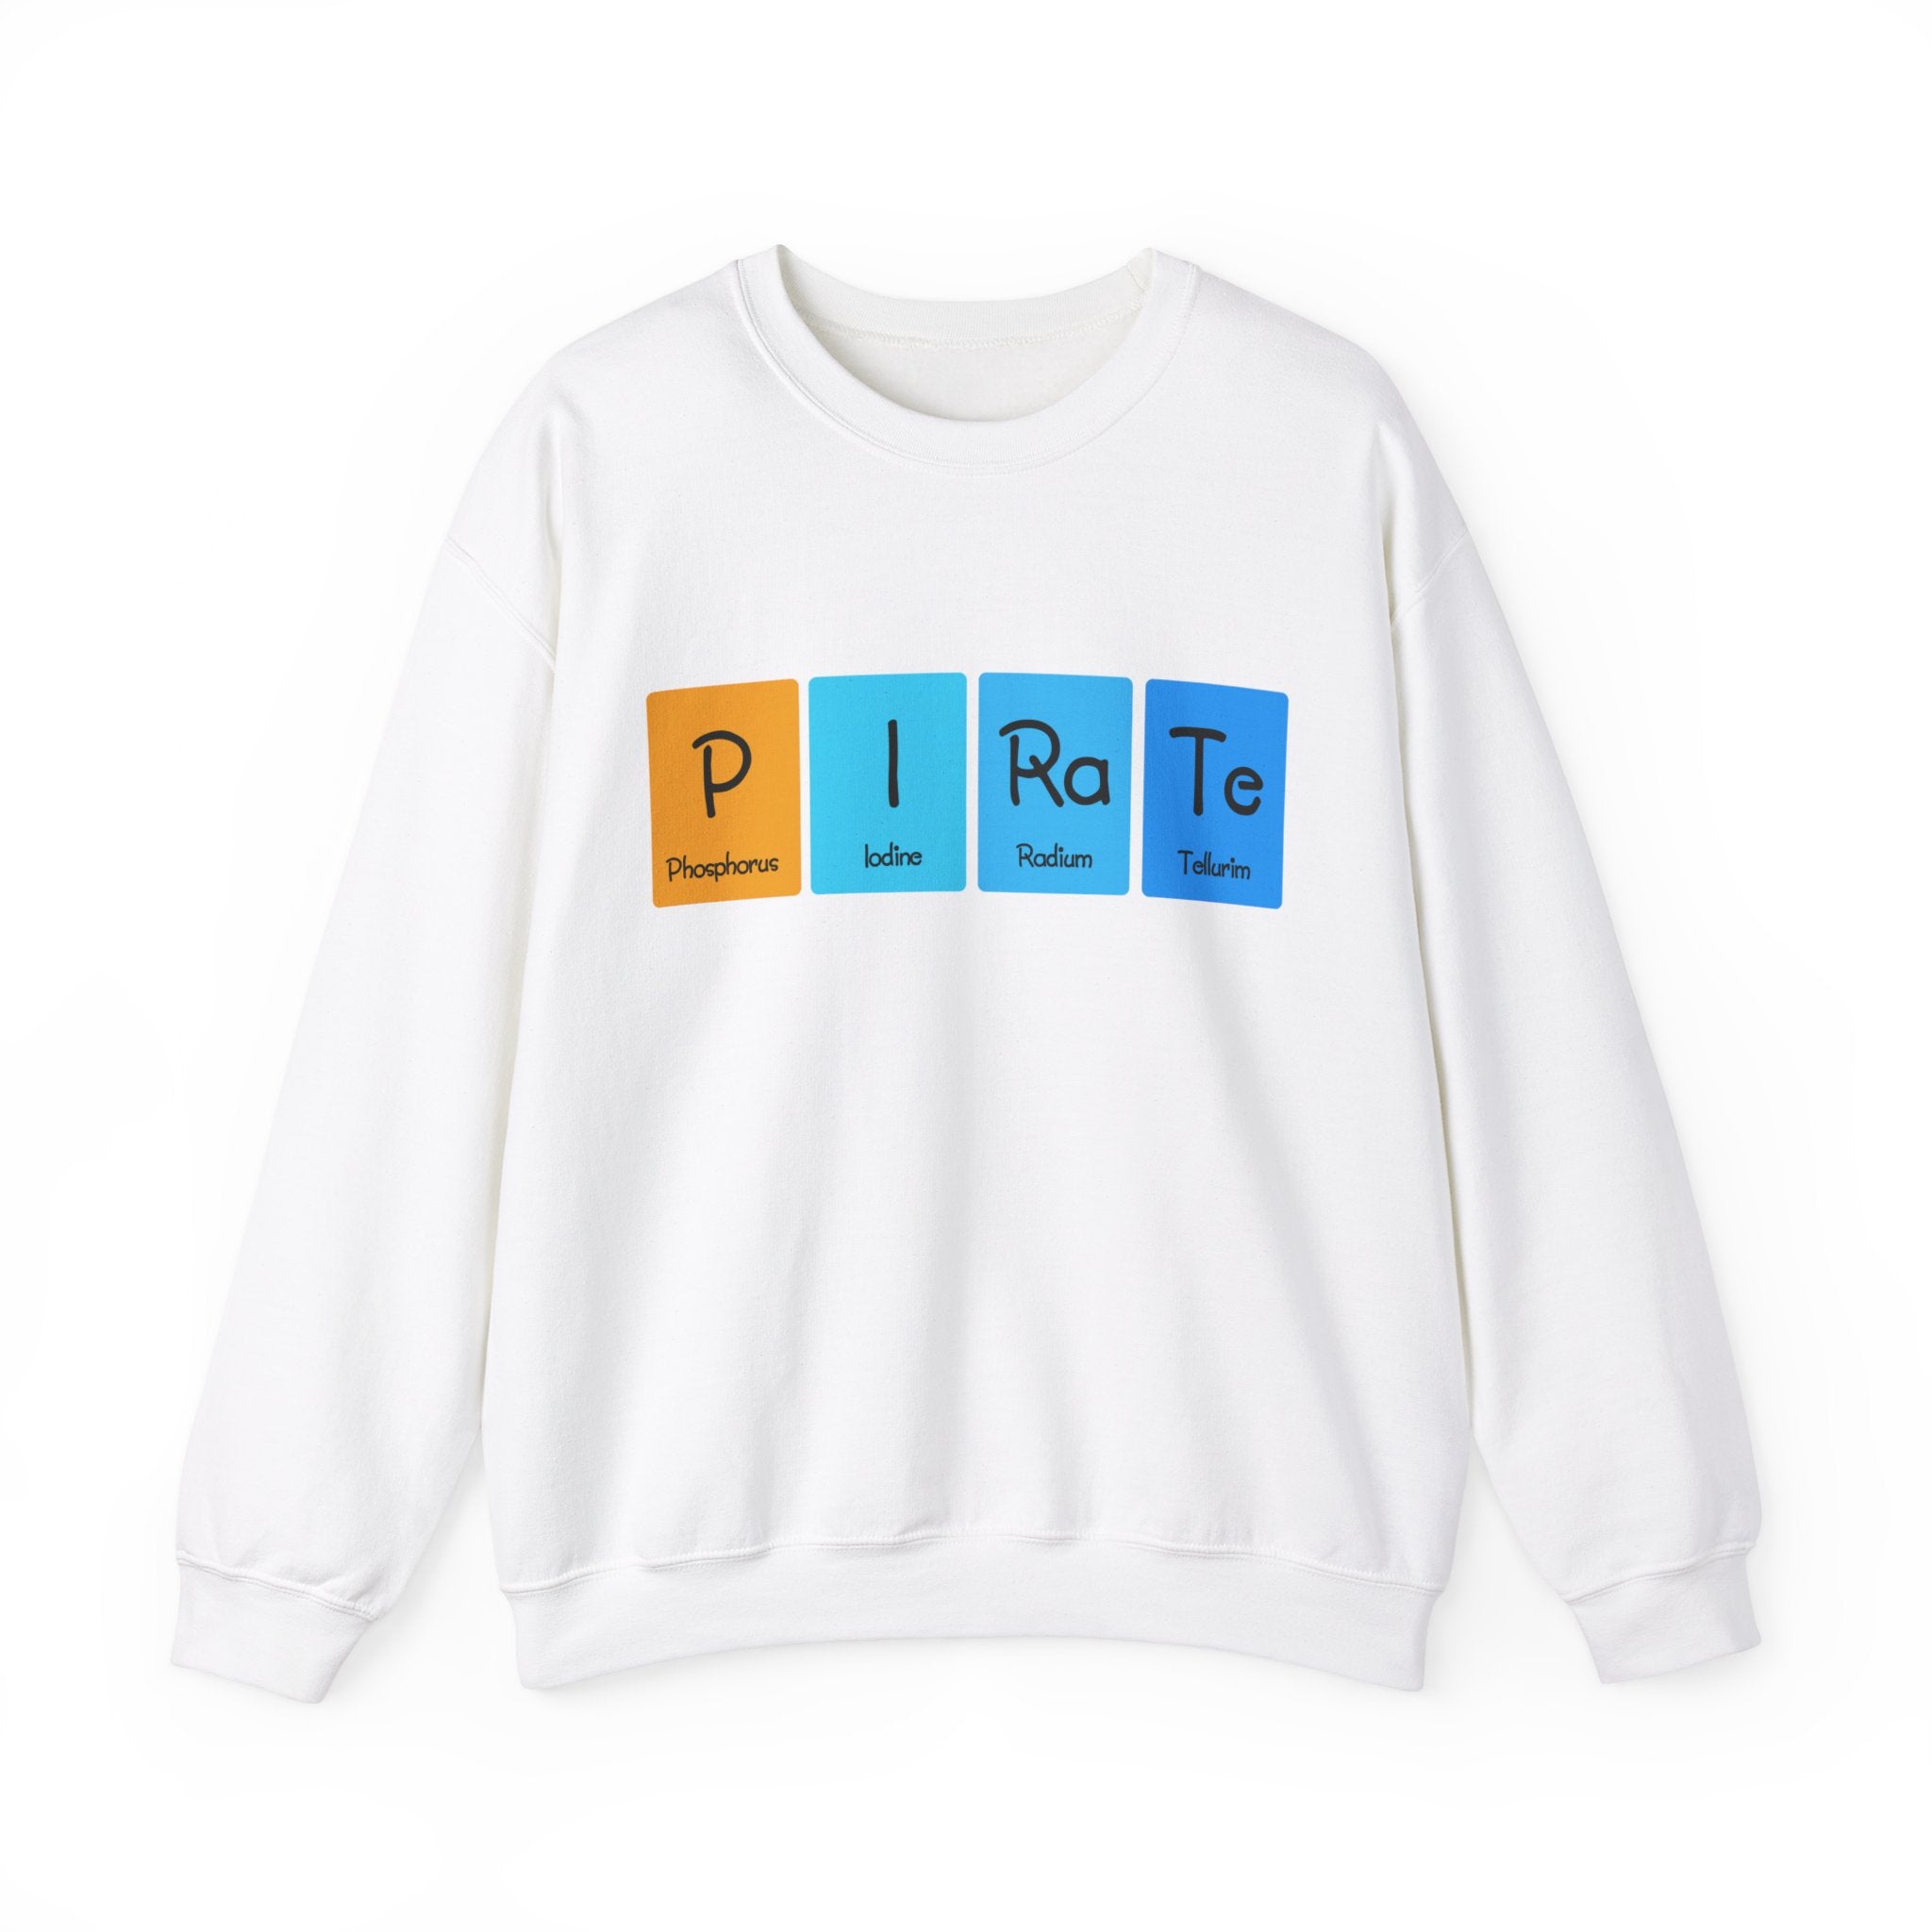 Cozy up in this white P-I-Ra-Te - Sweatshirt featuring "PIRATE" spelled out using periodic table elements—Phosphorus (P), Iodine (I), Radium (Ra), and Tellurium (Te). Perfect for the colder months, this unique design adds a scientific twist to your wardrobe.